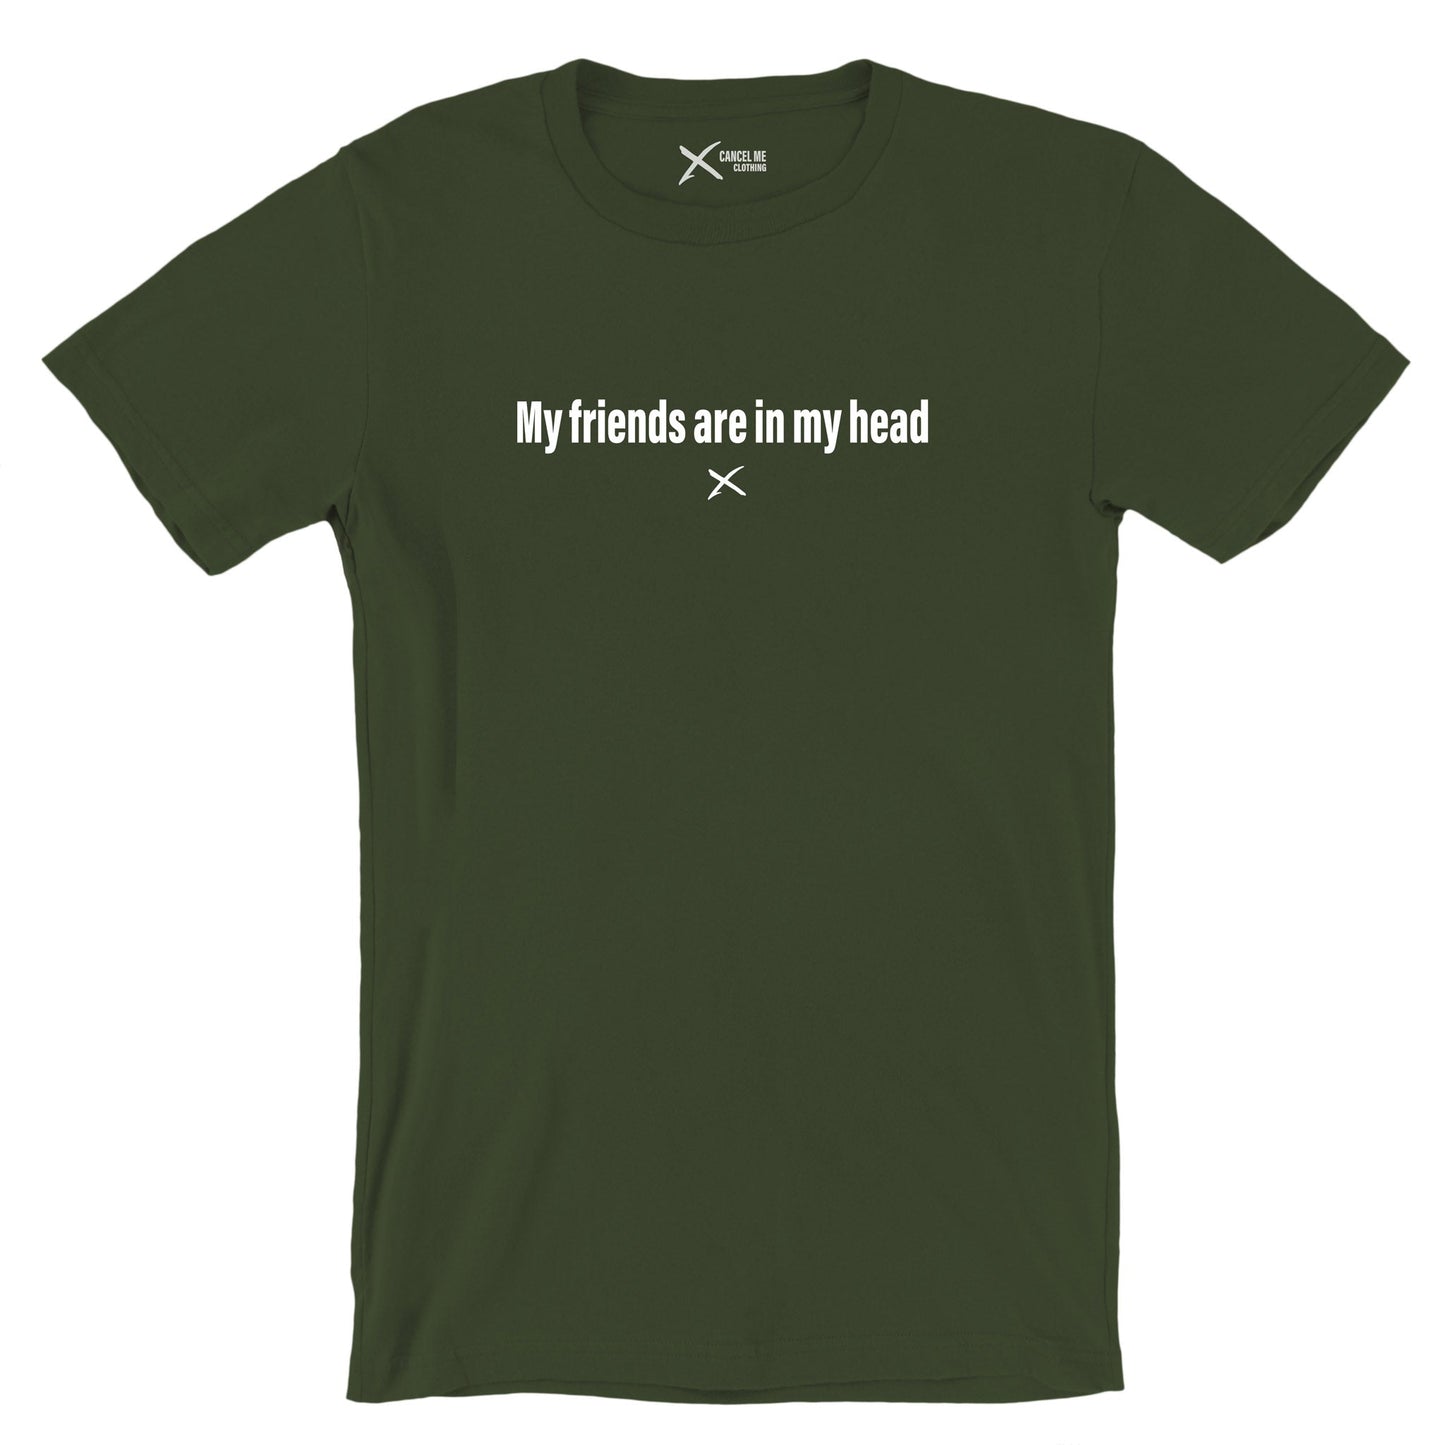 My friends are in my head - Shirt